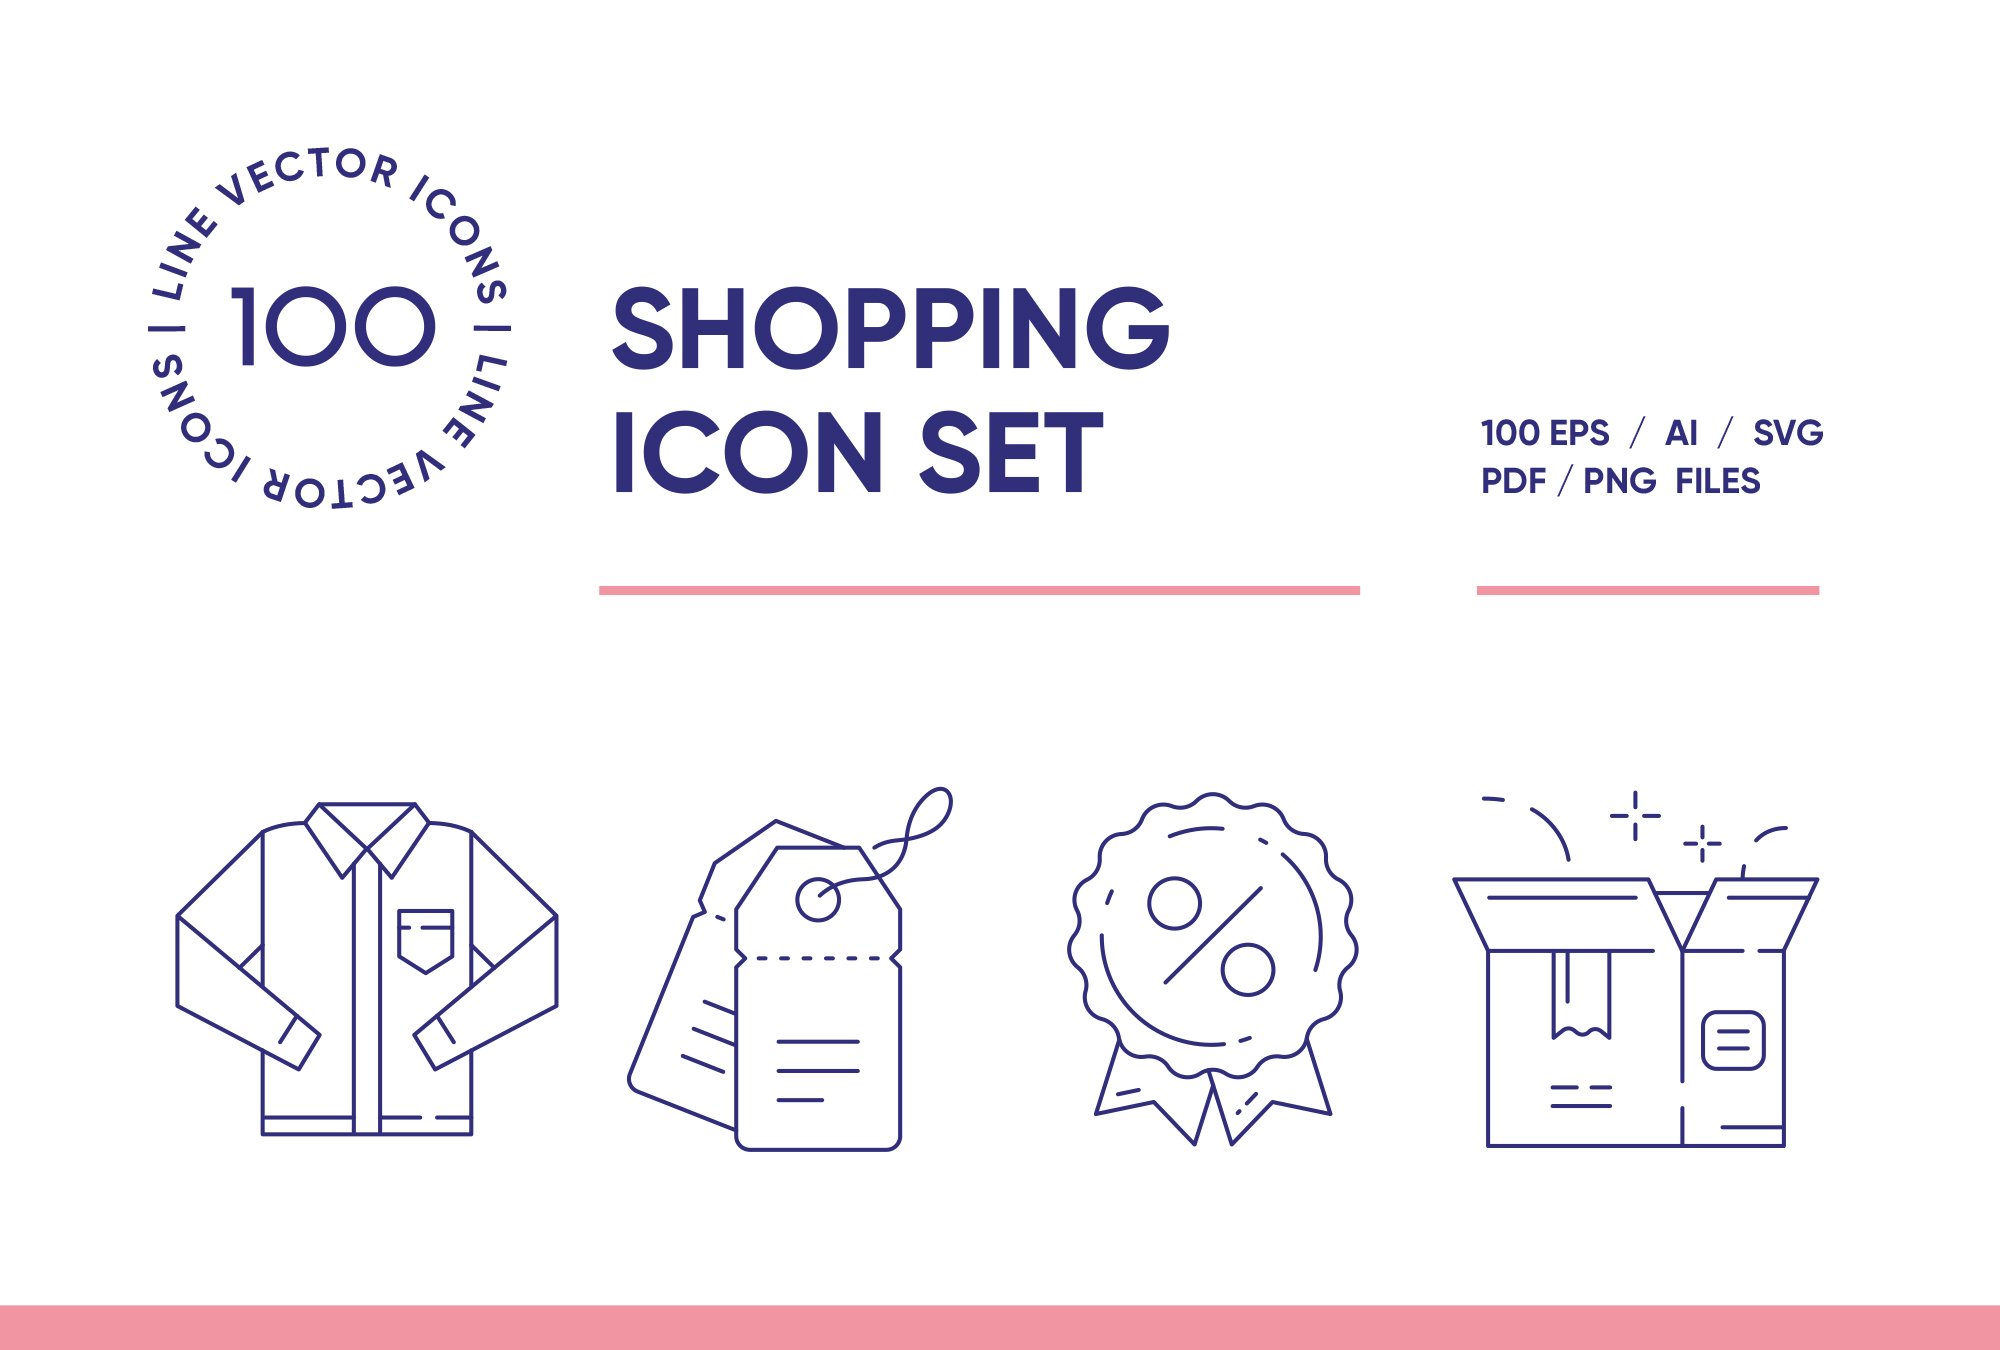 Online Clothes Shopping Icon Set cover image.